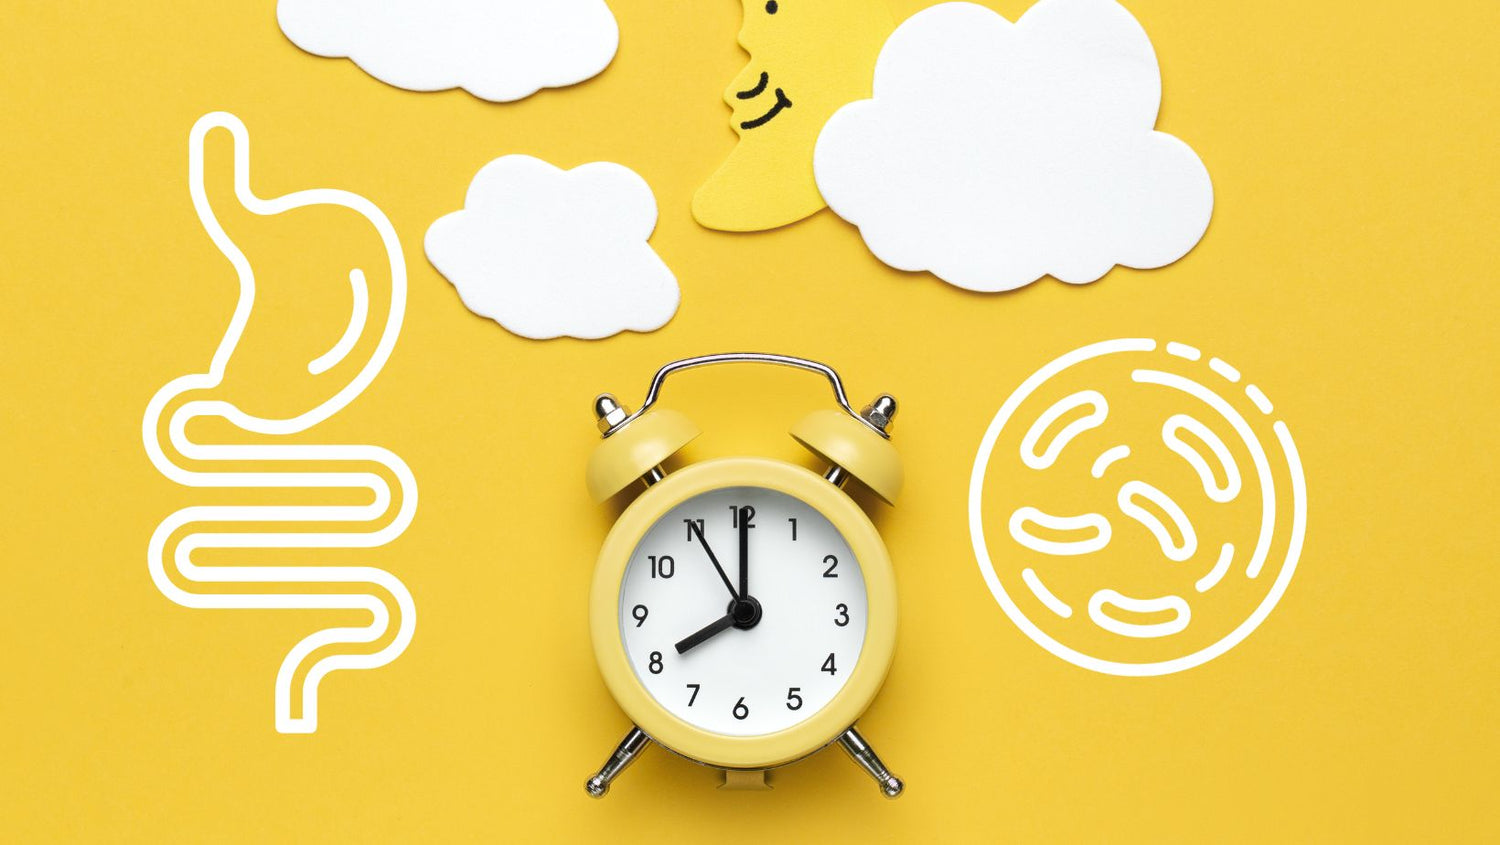 Yellow round alarm clock, moon and white clouds on the yellow background with guts symbol